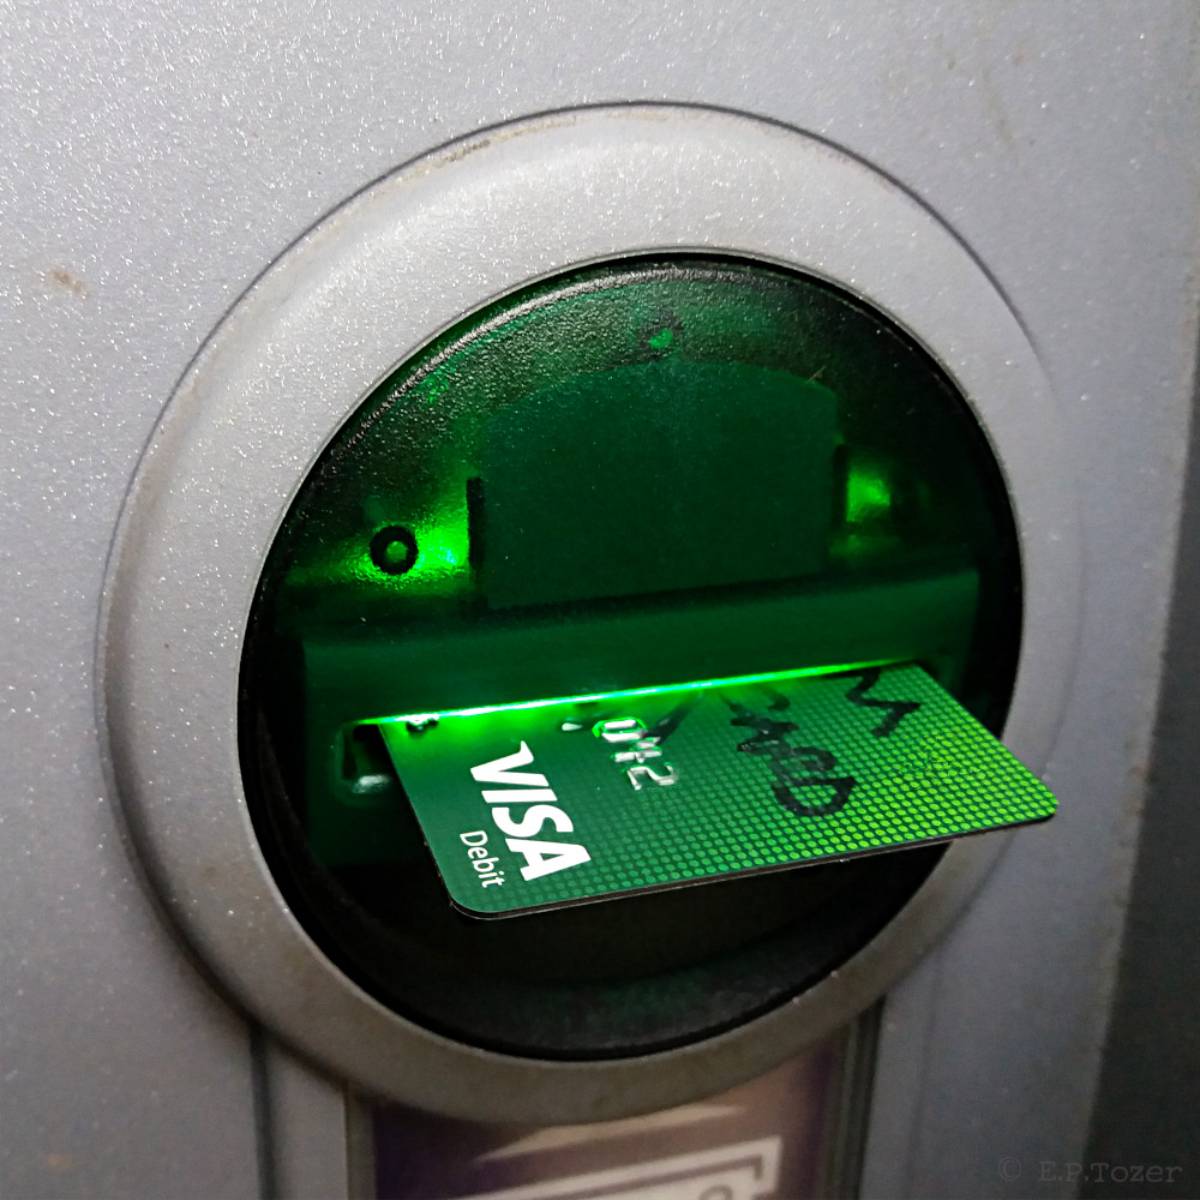 How to Block my ATM Card (First Bank, GTB, Access)